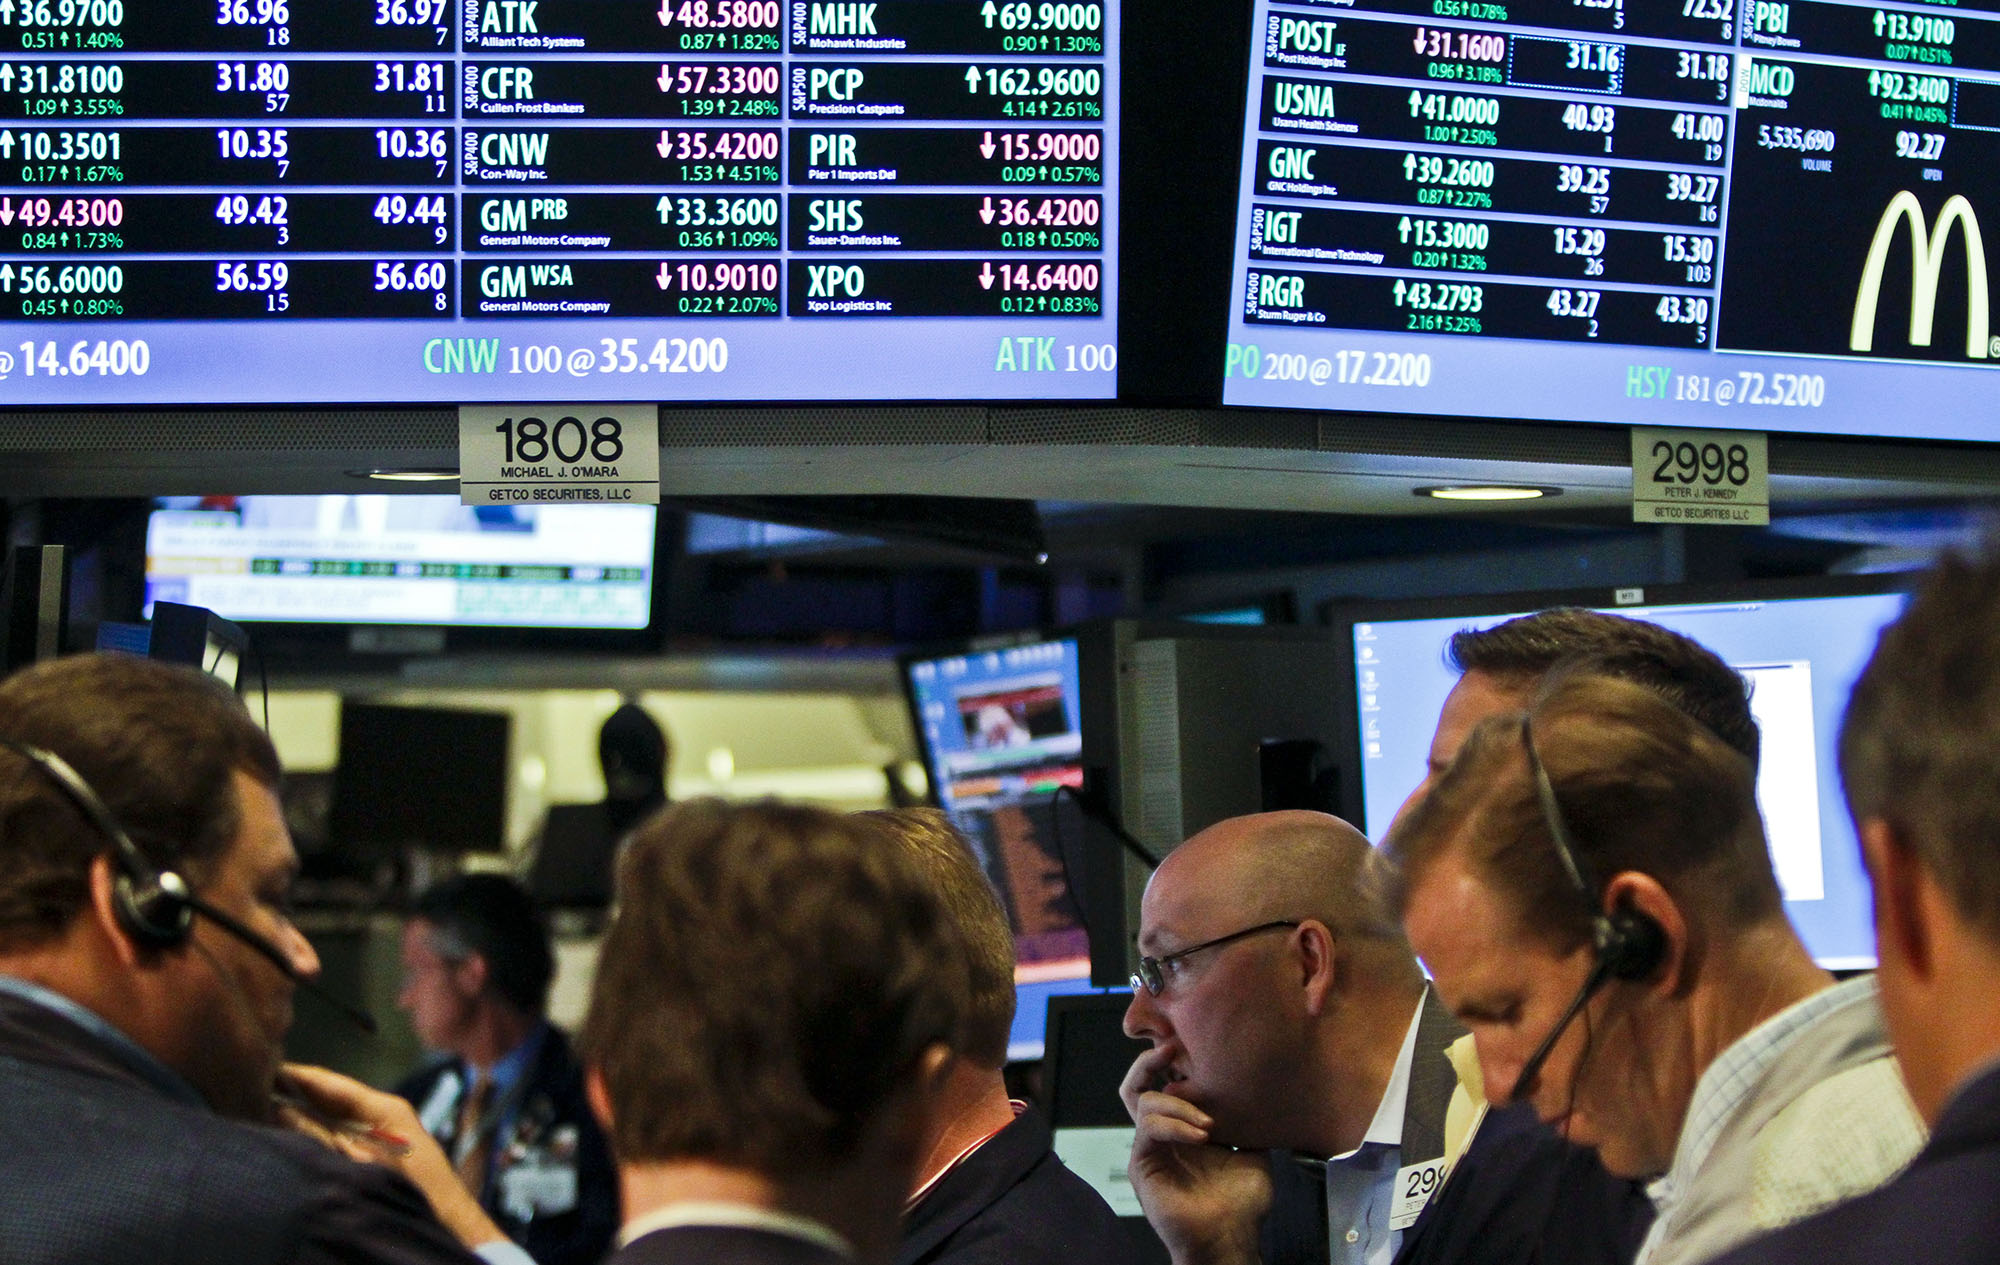 Traders on the stock trading floor